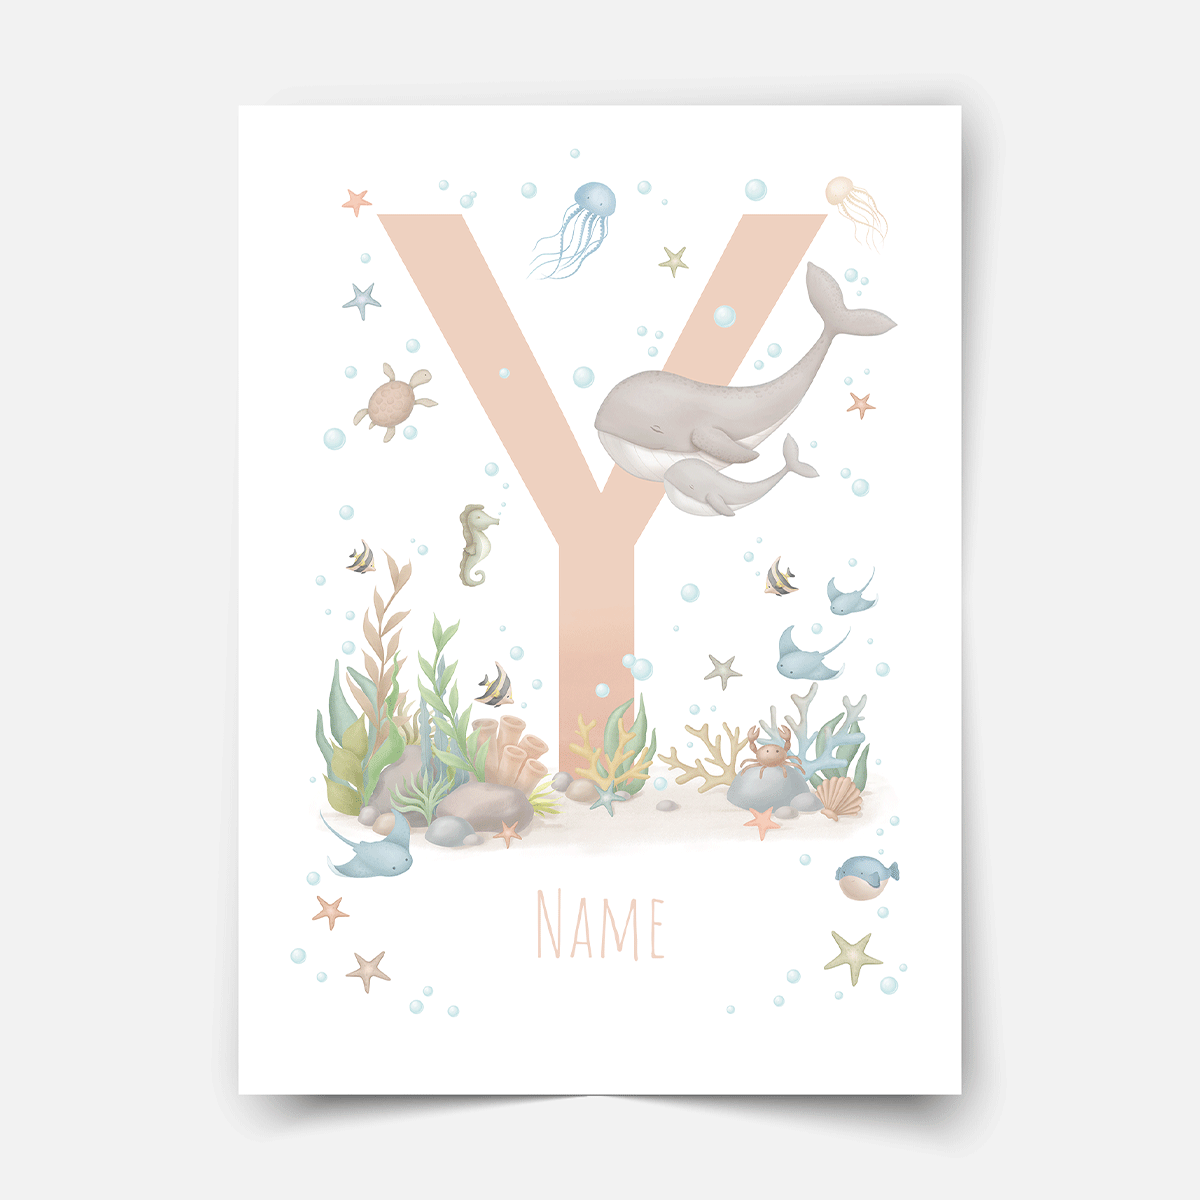 Personalised print - ABC Letters - Magical ocean (soft pink)